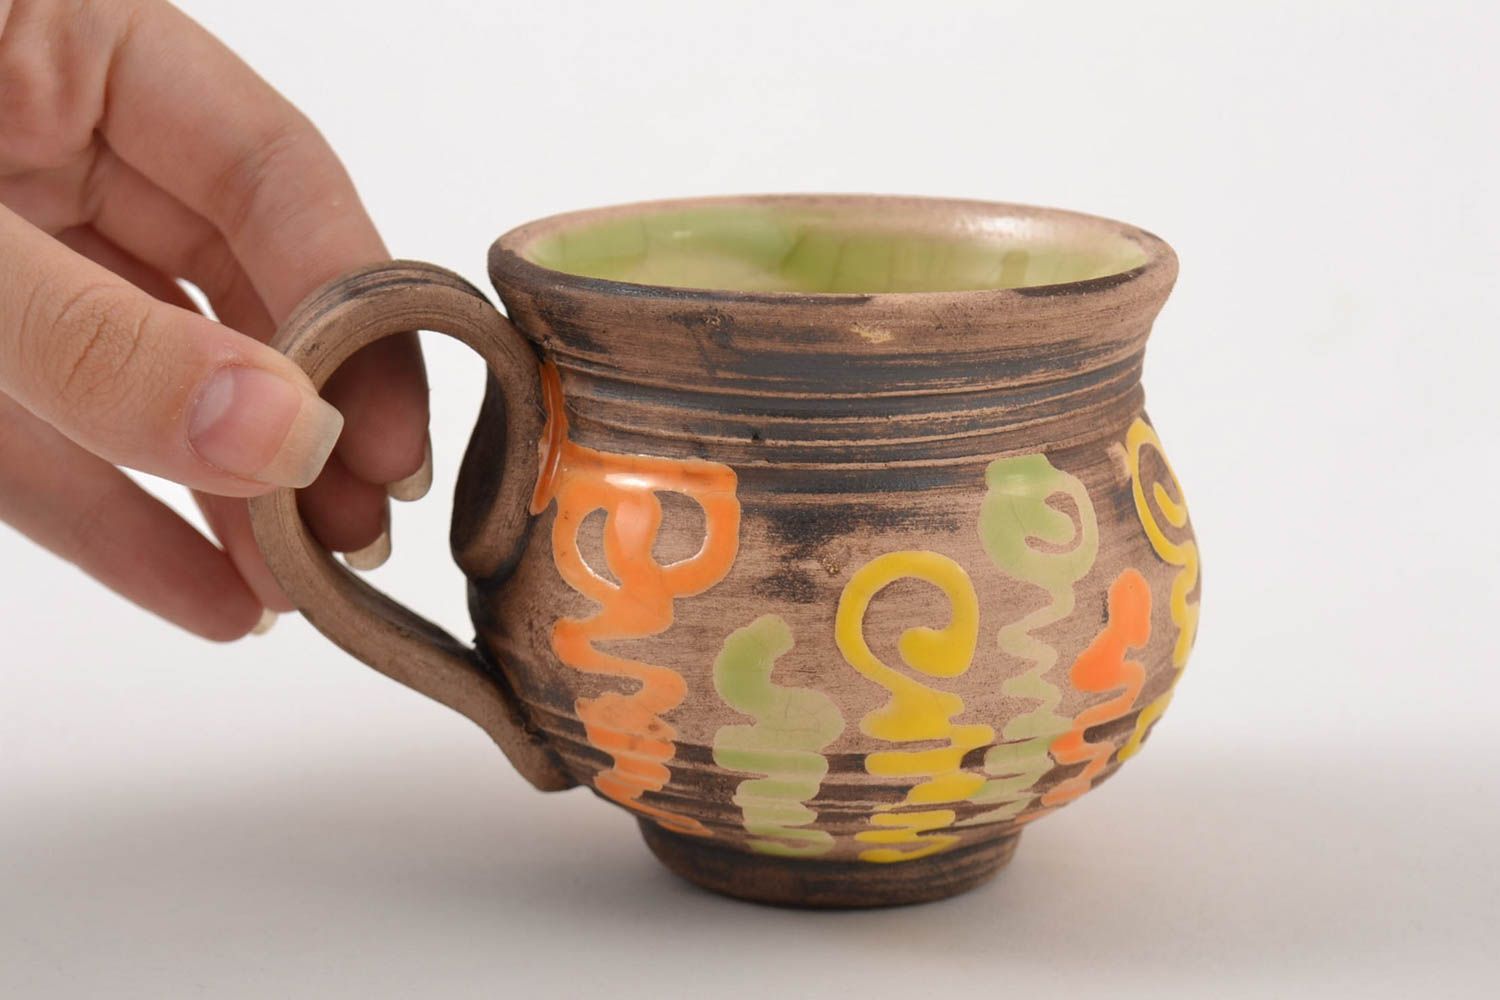 Ceramic pot style rustic teacup with orange, olive, yellow patterns. 6 oz, wide handle. photo 3